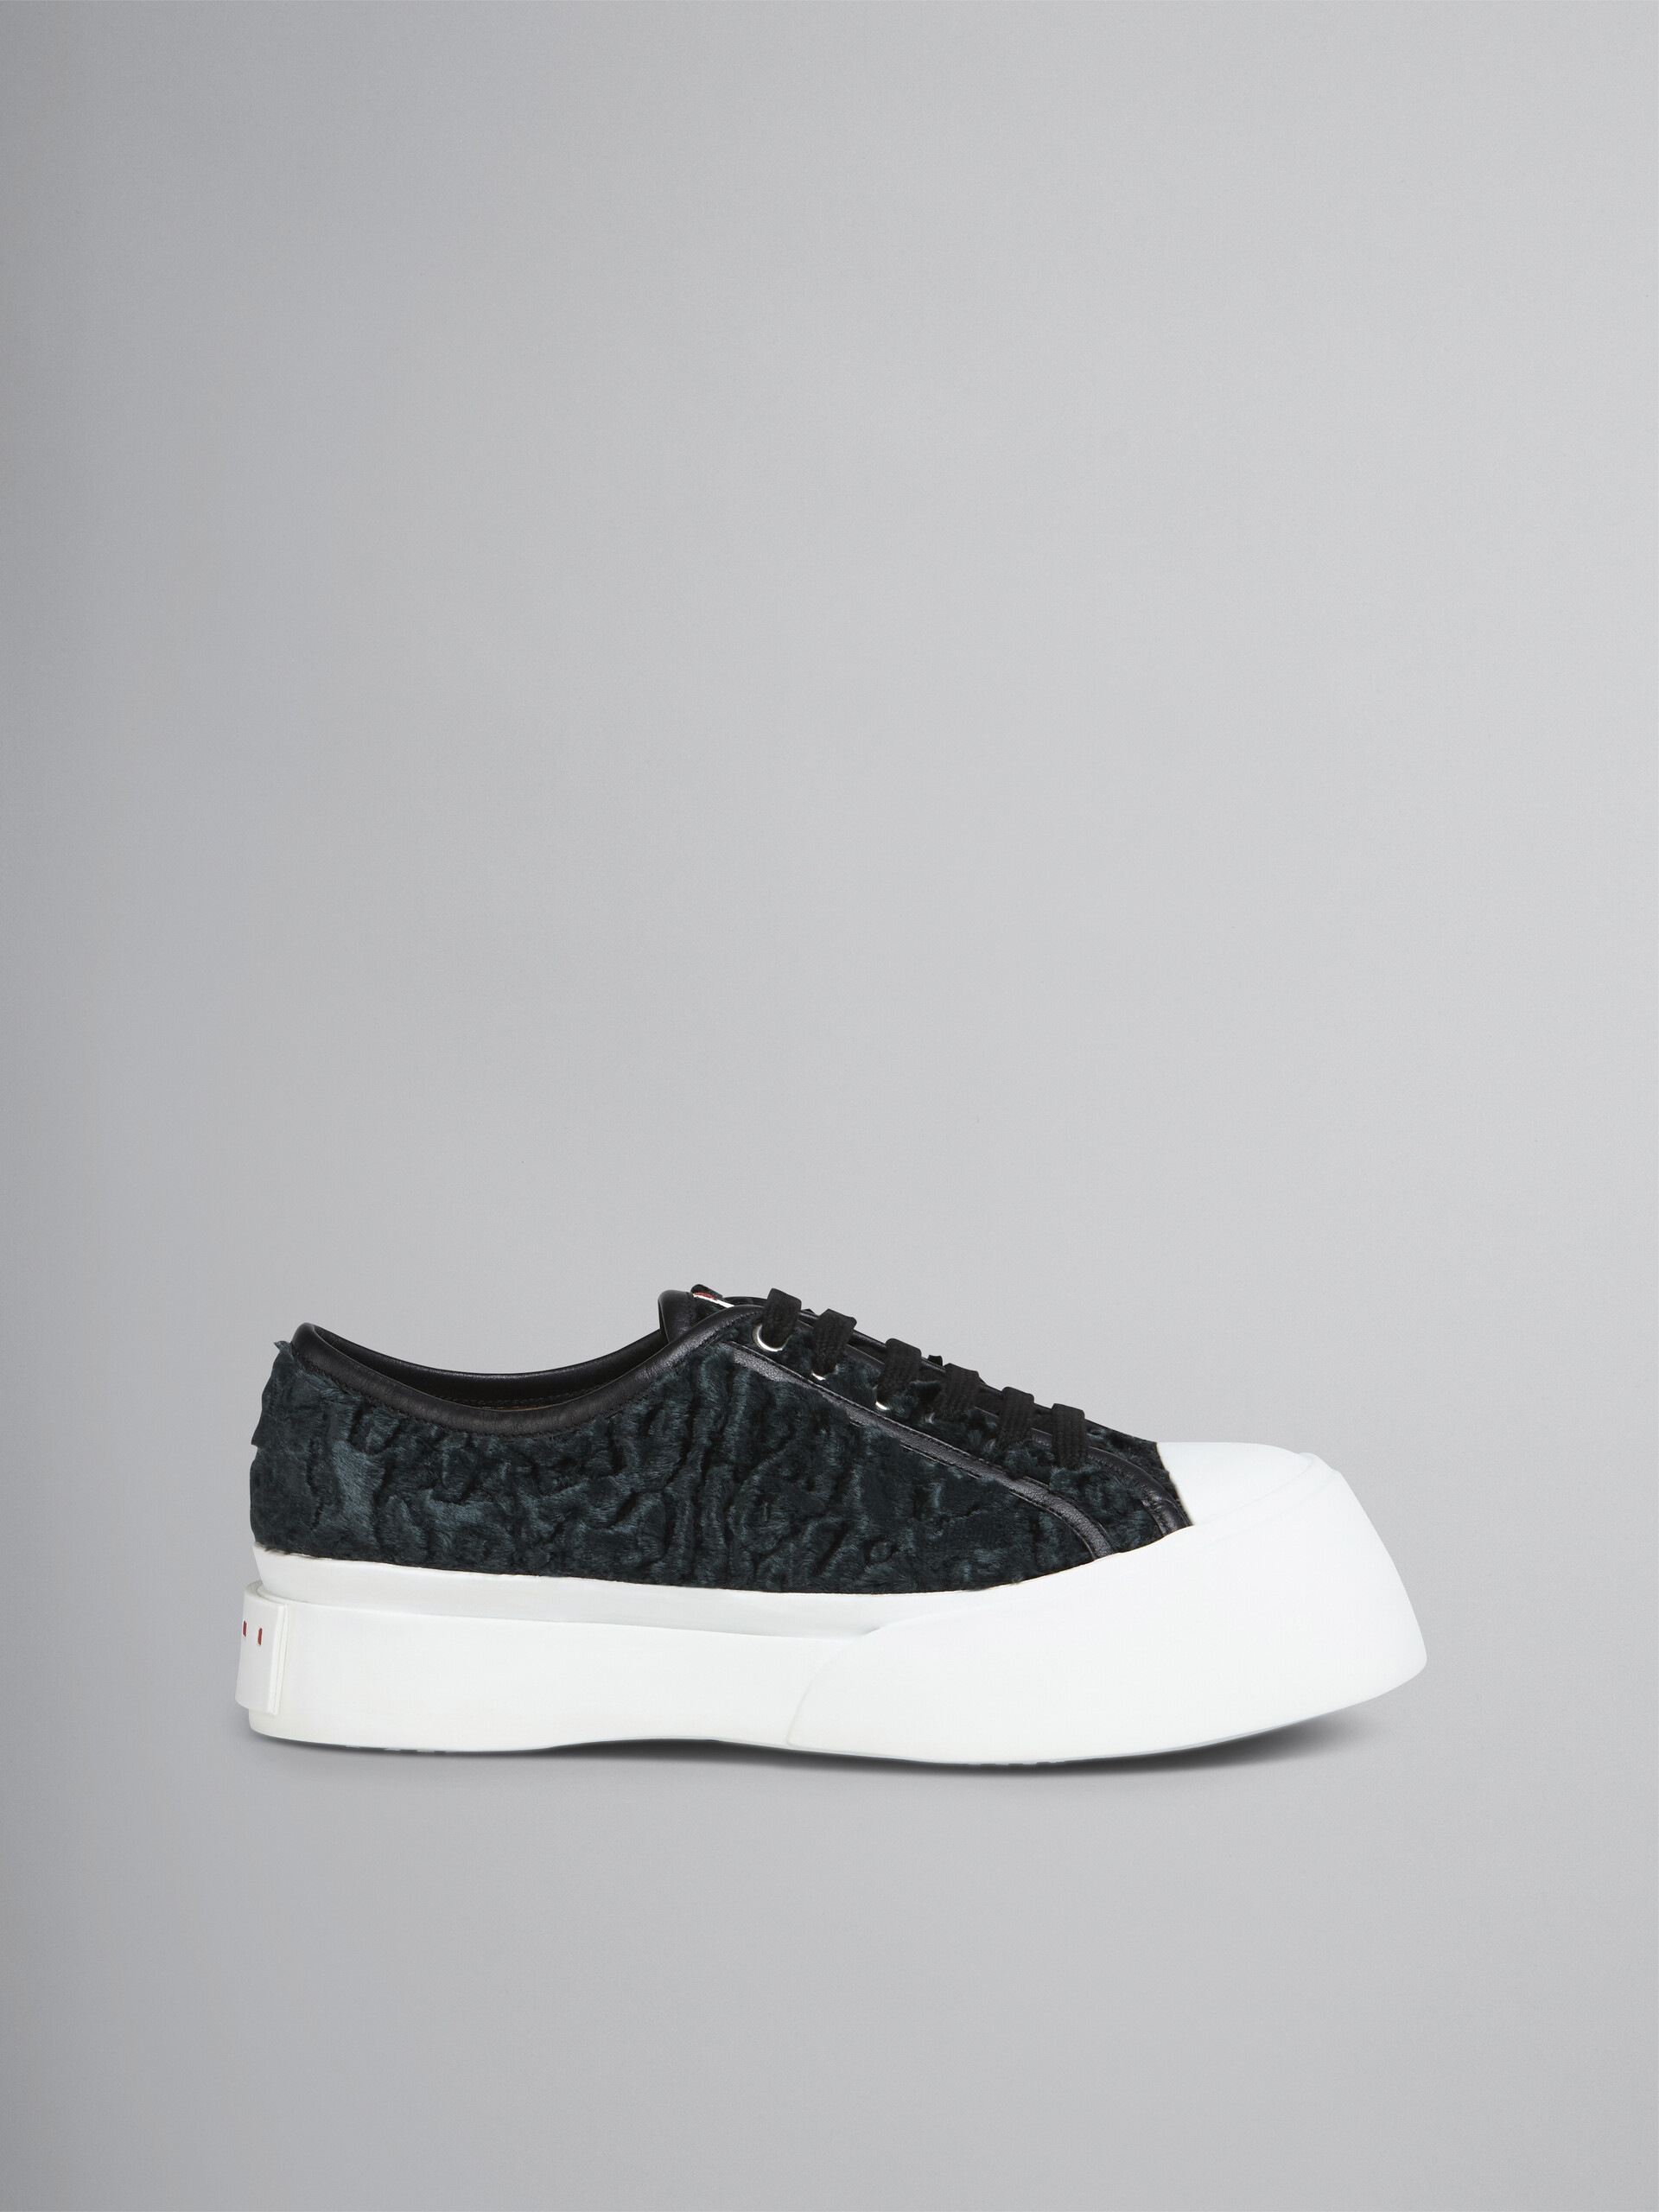 Curly fabric PABLO sneaker - Sneakers - Image 1